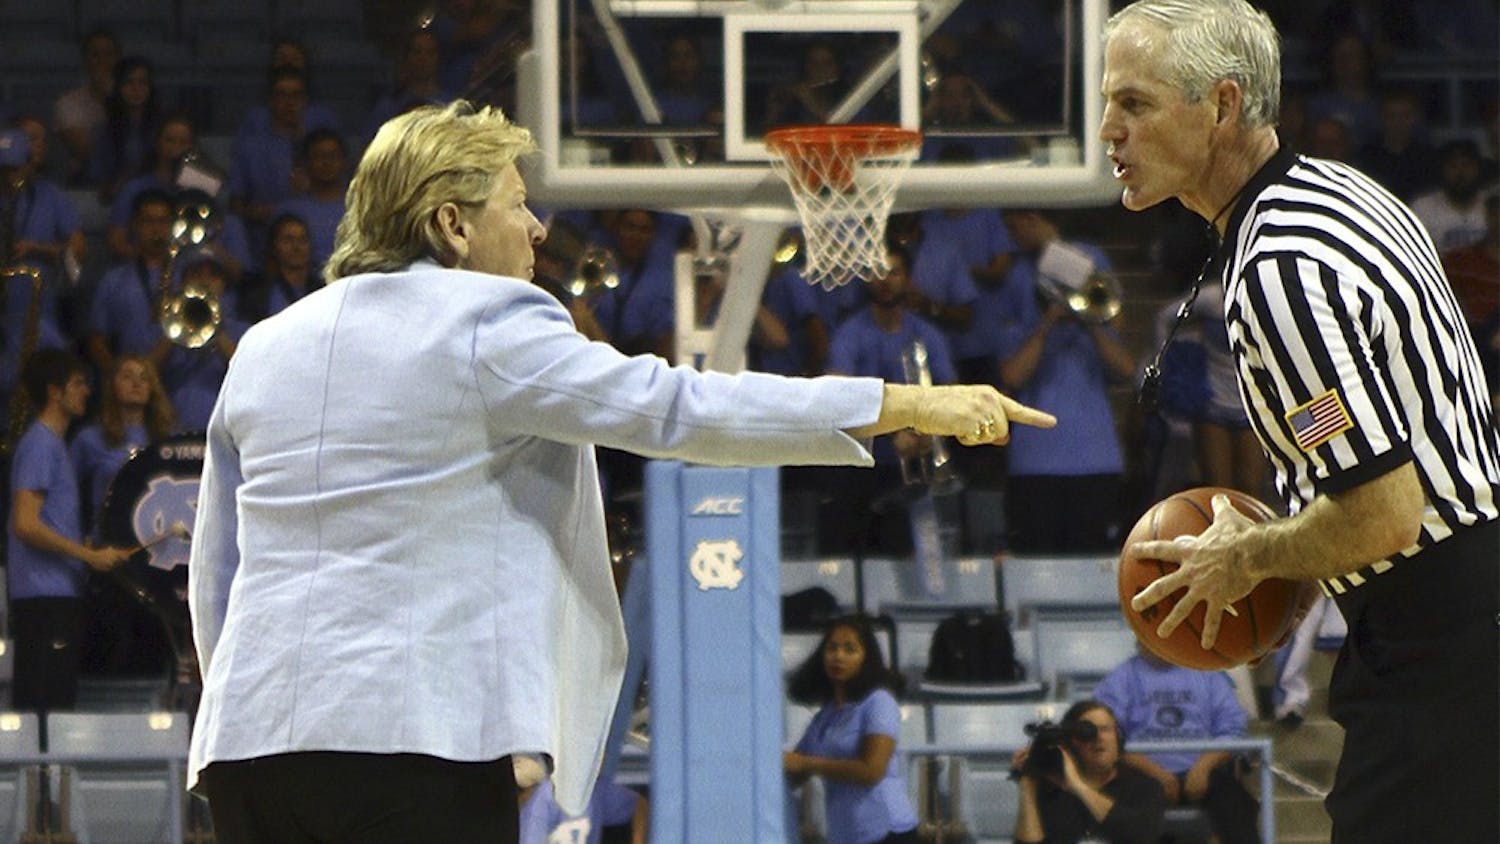 North Carolina head coach Sylvia Hatchell argues with an official over a call favoring Notre Dame in January 2015.